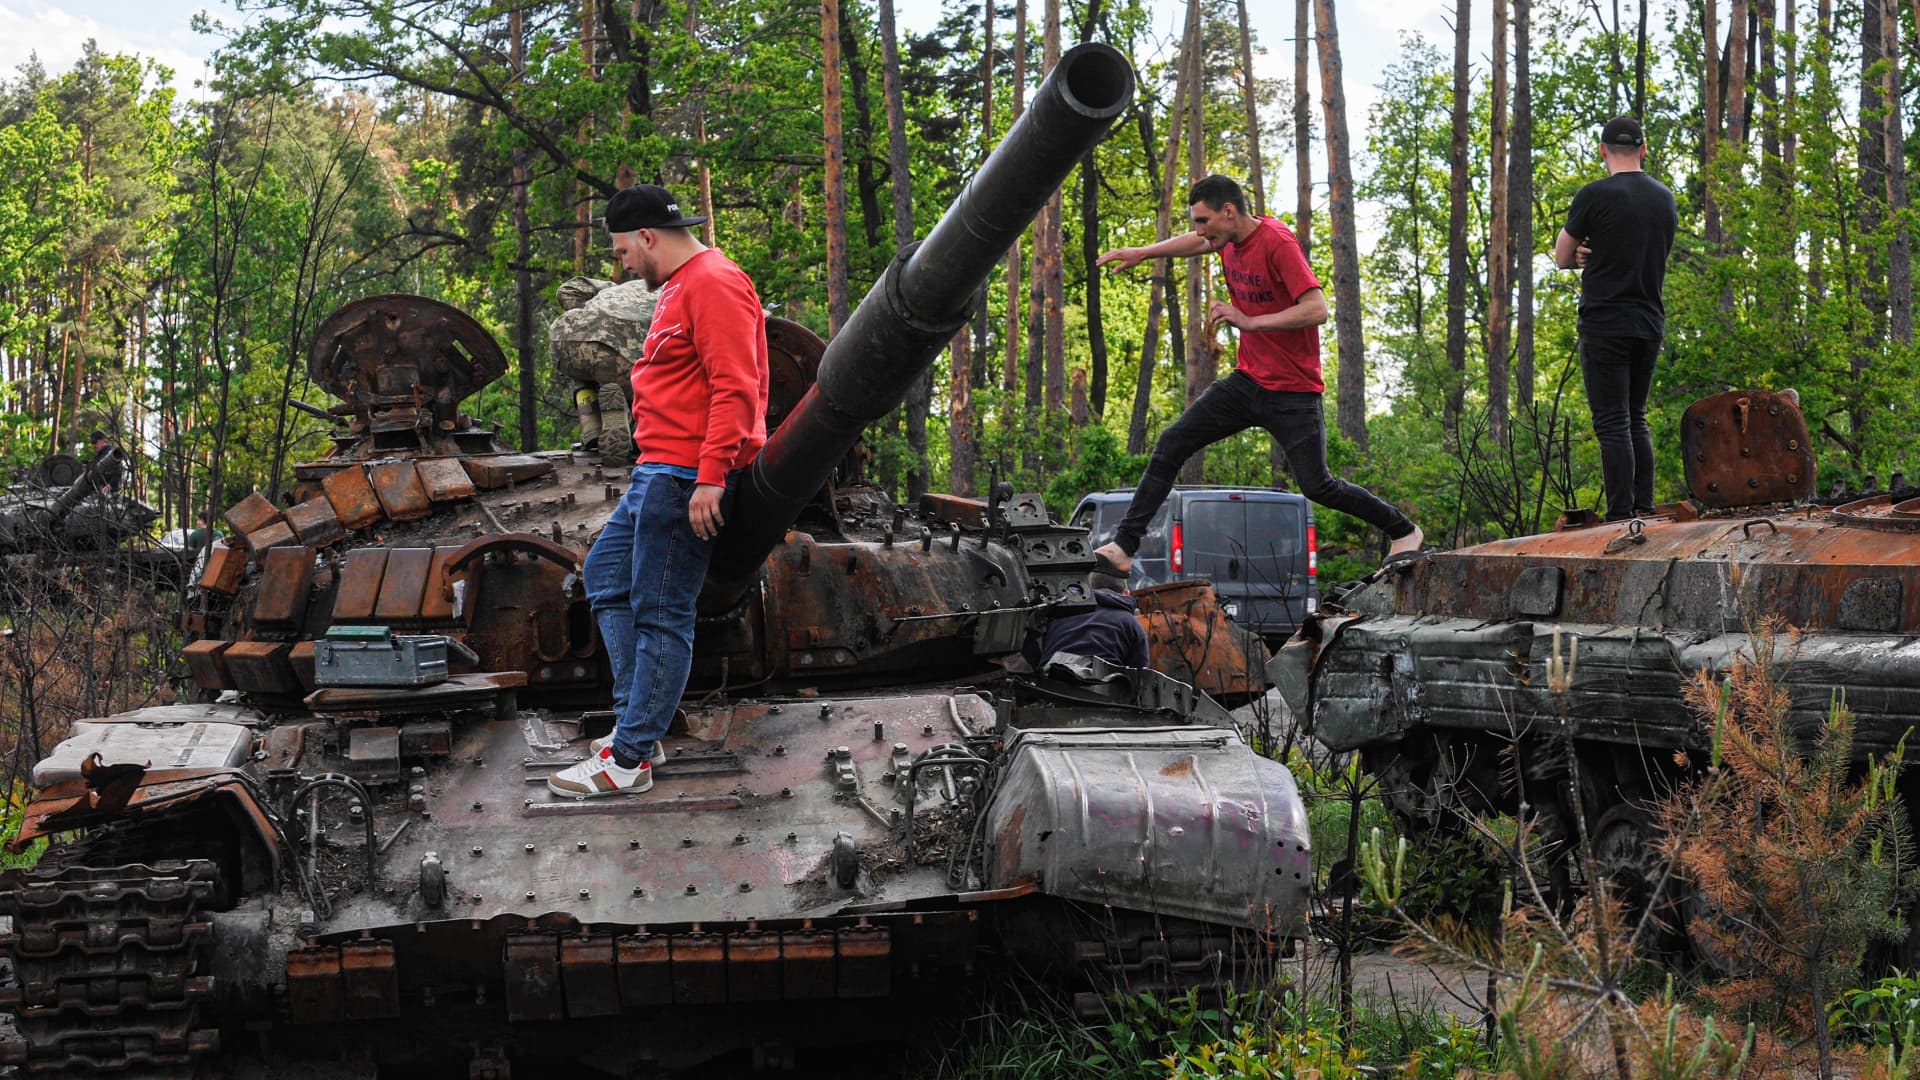 People are looking at the destroyed Russian military armored vehicles at Dmytrivka village near the Ukrainian capital Kyiv.